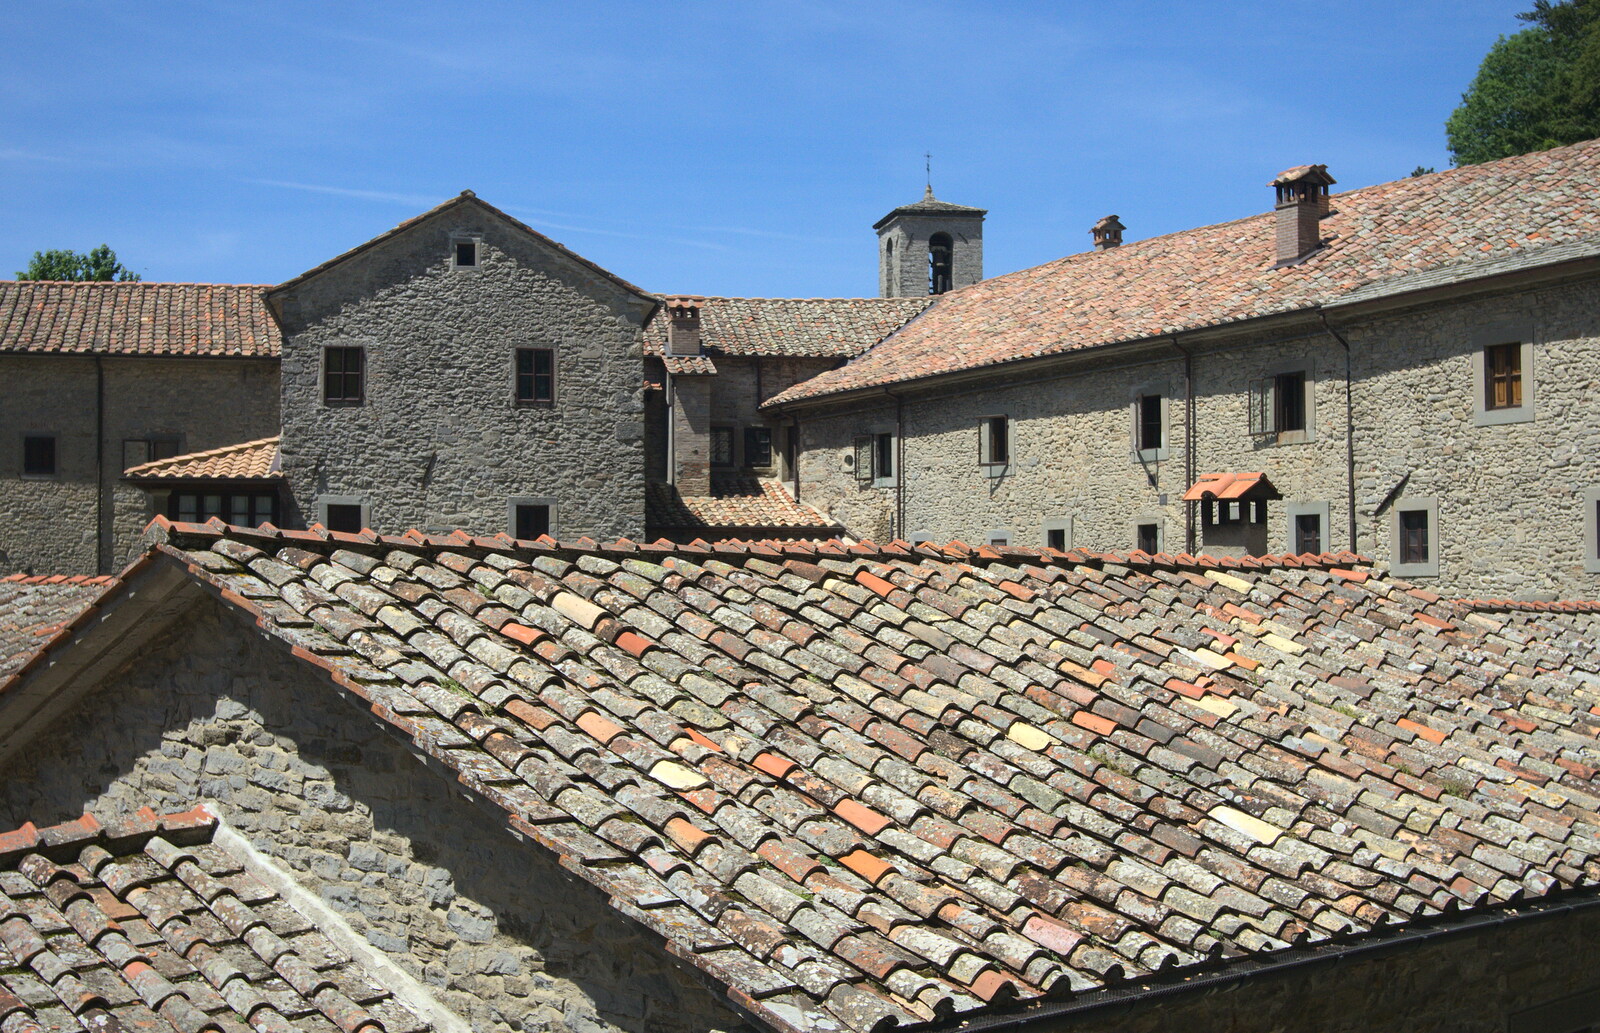 The pantile roofs of La Verna from La Verna Monastery and the Fireflies of Tuscany, Italy - 14th June 2013